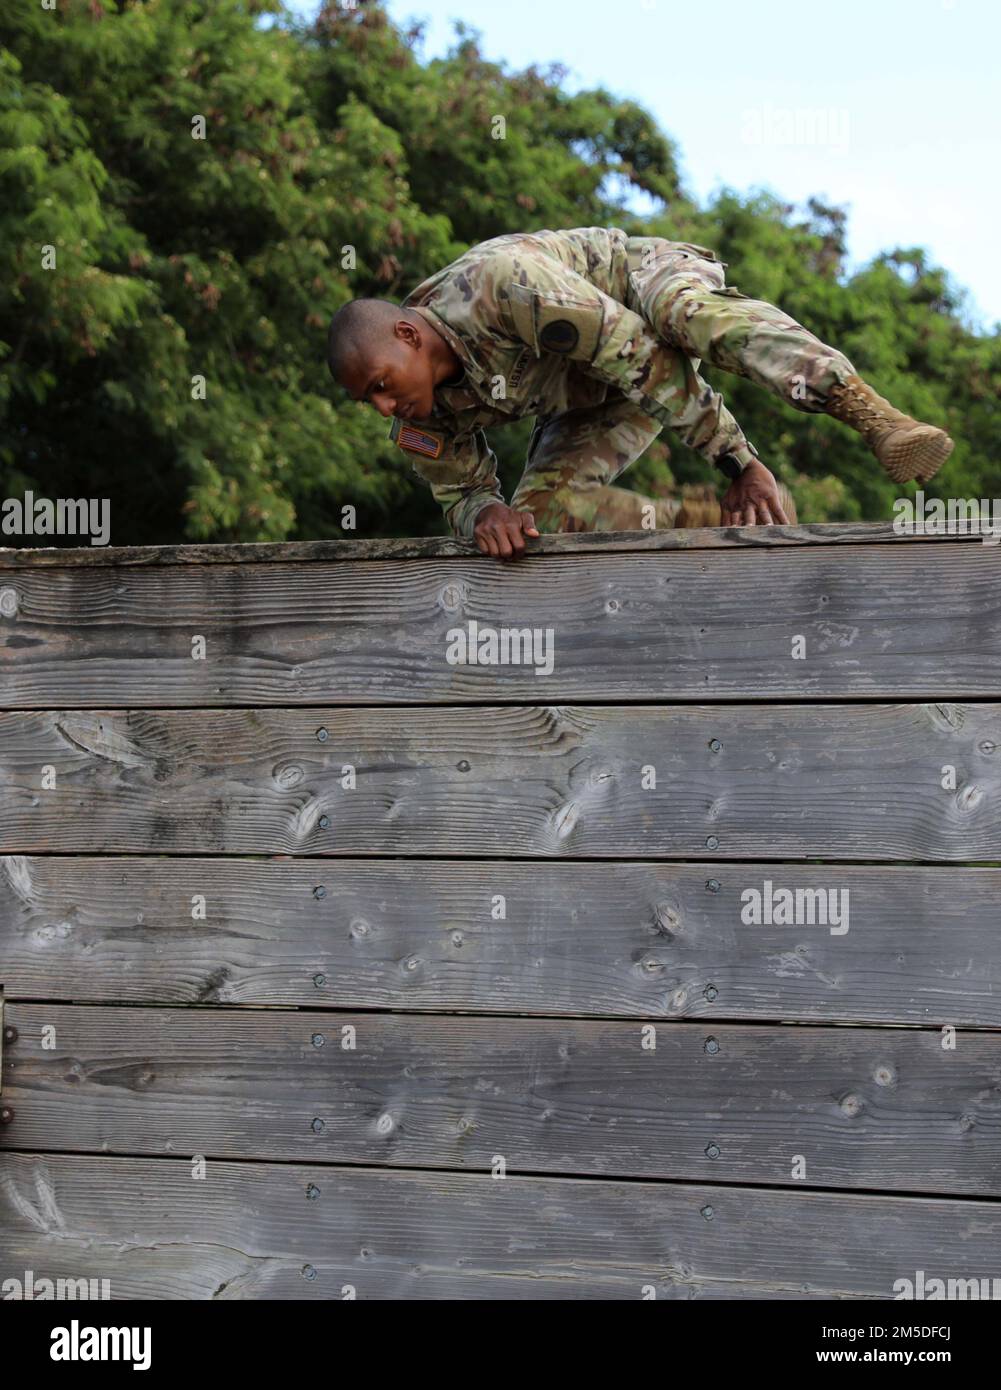 Hawaii Army National Guard (HIARNG) Soldier Spc. Kevin T. Brown, a mass communications specialist assigned to the 117th Mobile Public Affairs Detachment (MPAD), 103rd Troop Command, jumps over the jump and land obstacle during the annual Best Warrior Competition (BWC) obstacle course event at Waimanalo, Hawaii, March 4, 2022. The BWC is an annual three-day event that Soldiers and Non-Commissioned Officers (NCOs) of the HIARNG and Hawaii Army Reserve compete in to earn the title of 'Best Warrior'. The BWC tests Soldiers' individual ability to adapt and overcome challenging scenarios and battle Stock Photo